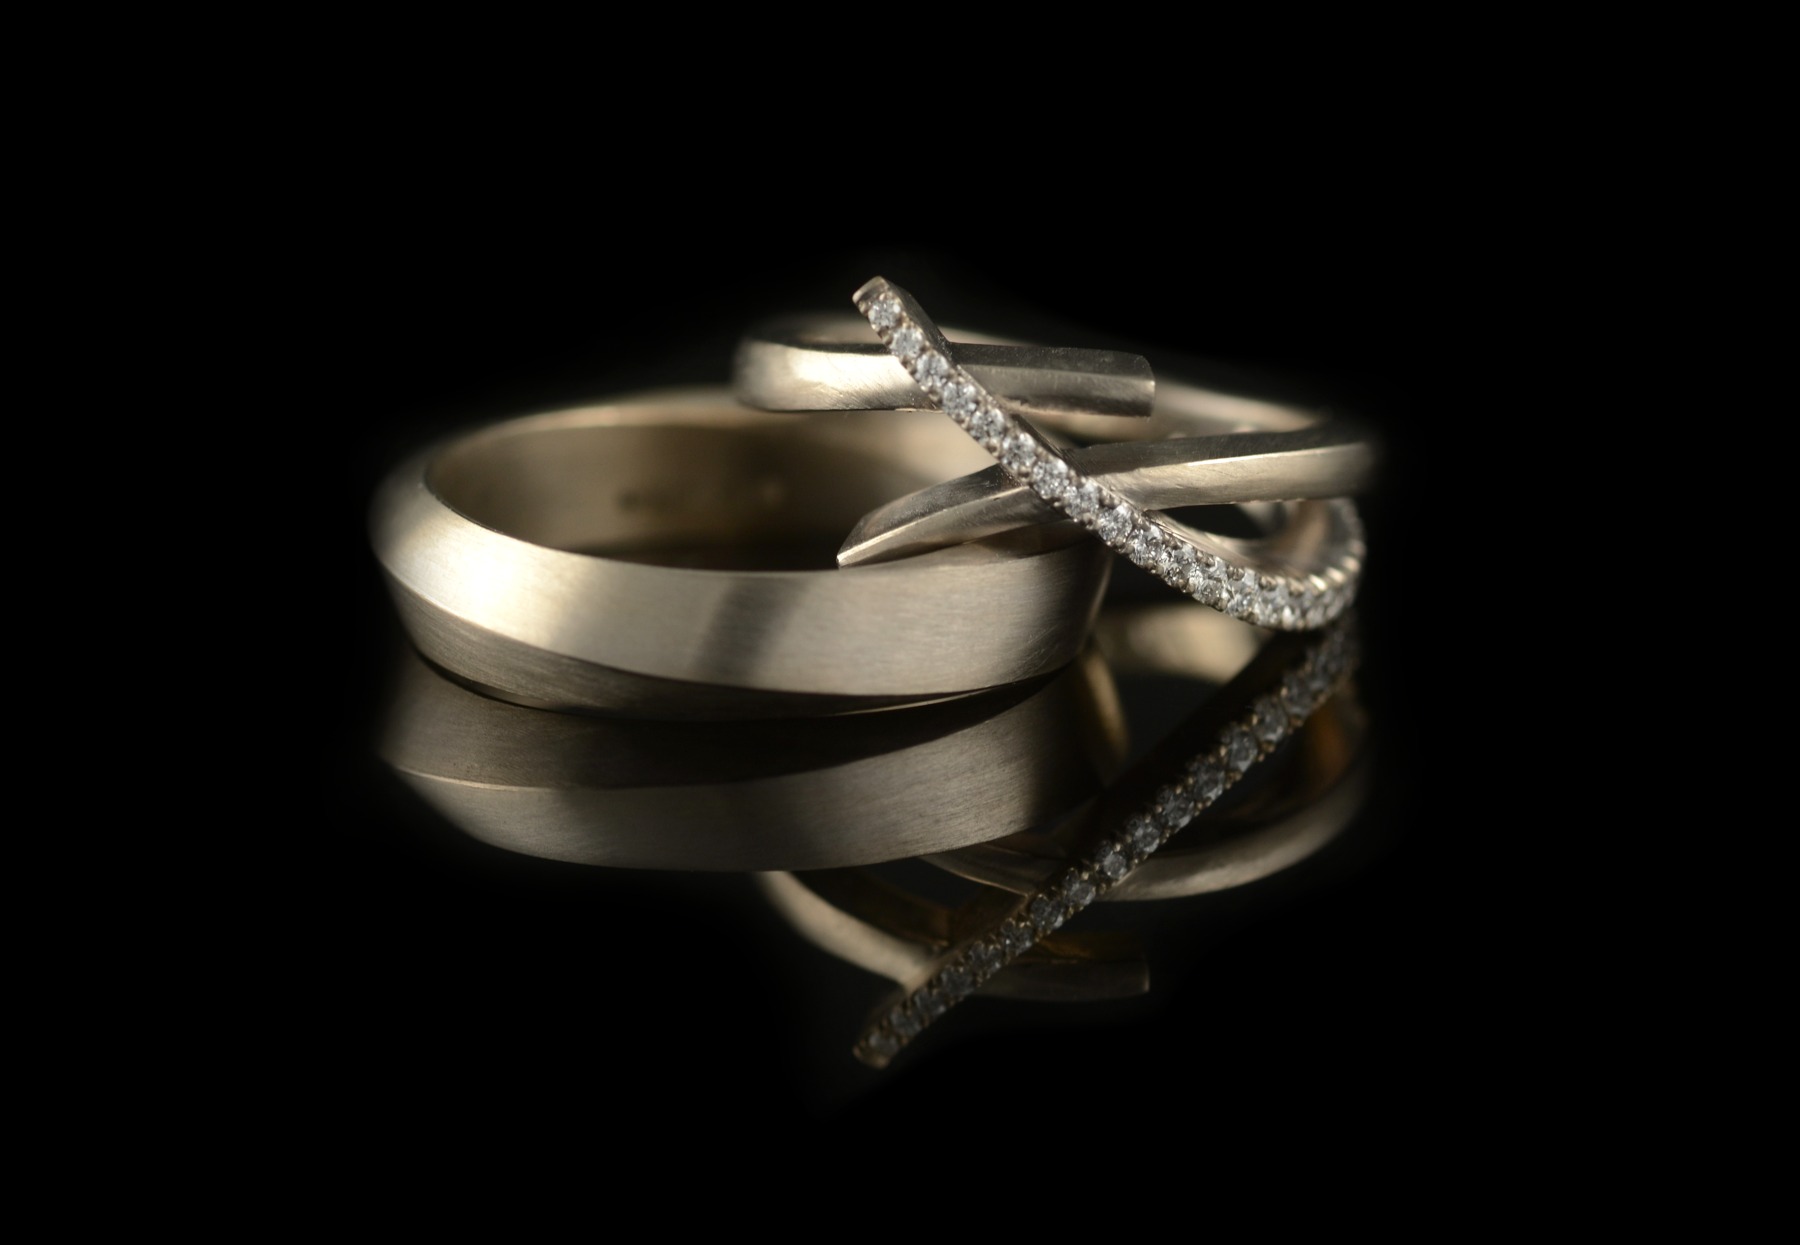 Unusual Mobius and crossover wedding rings